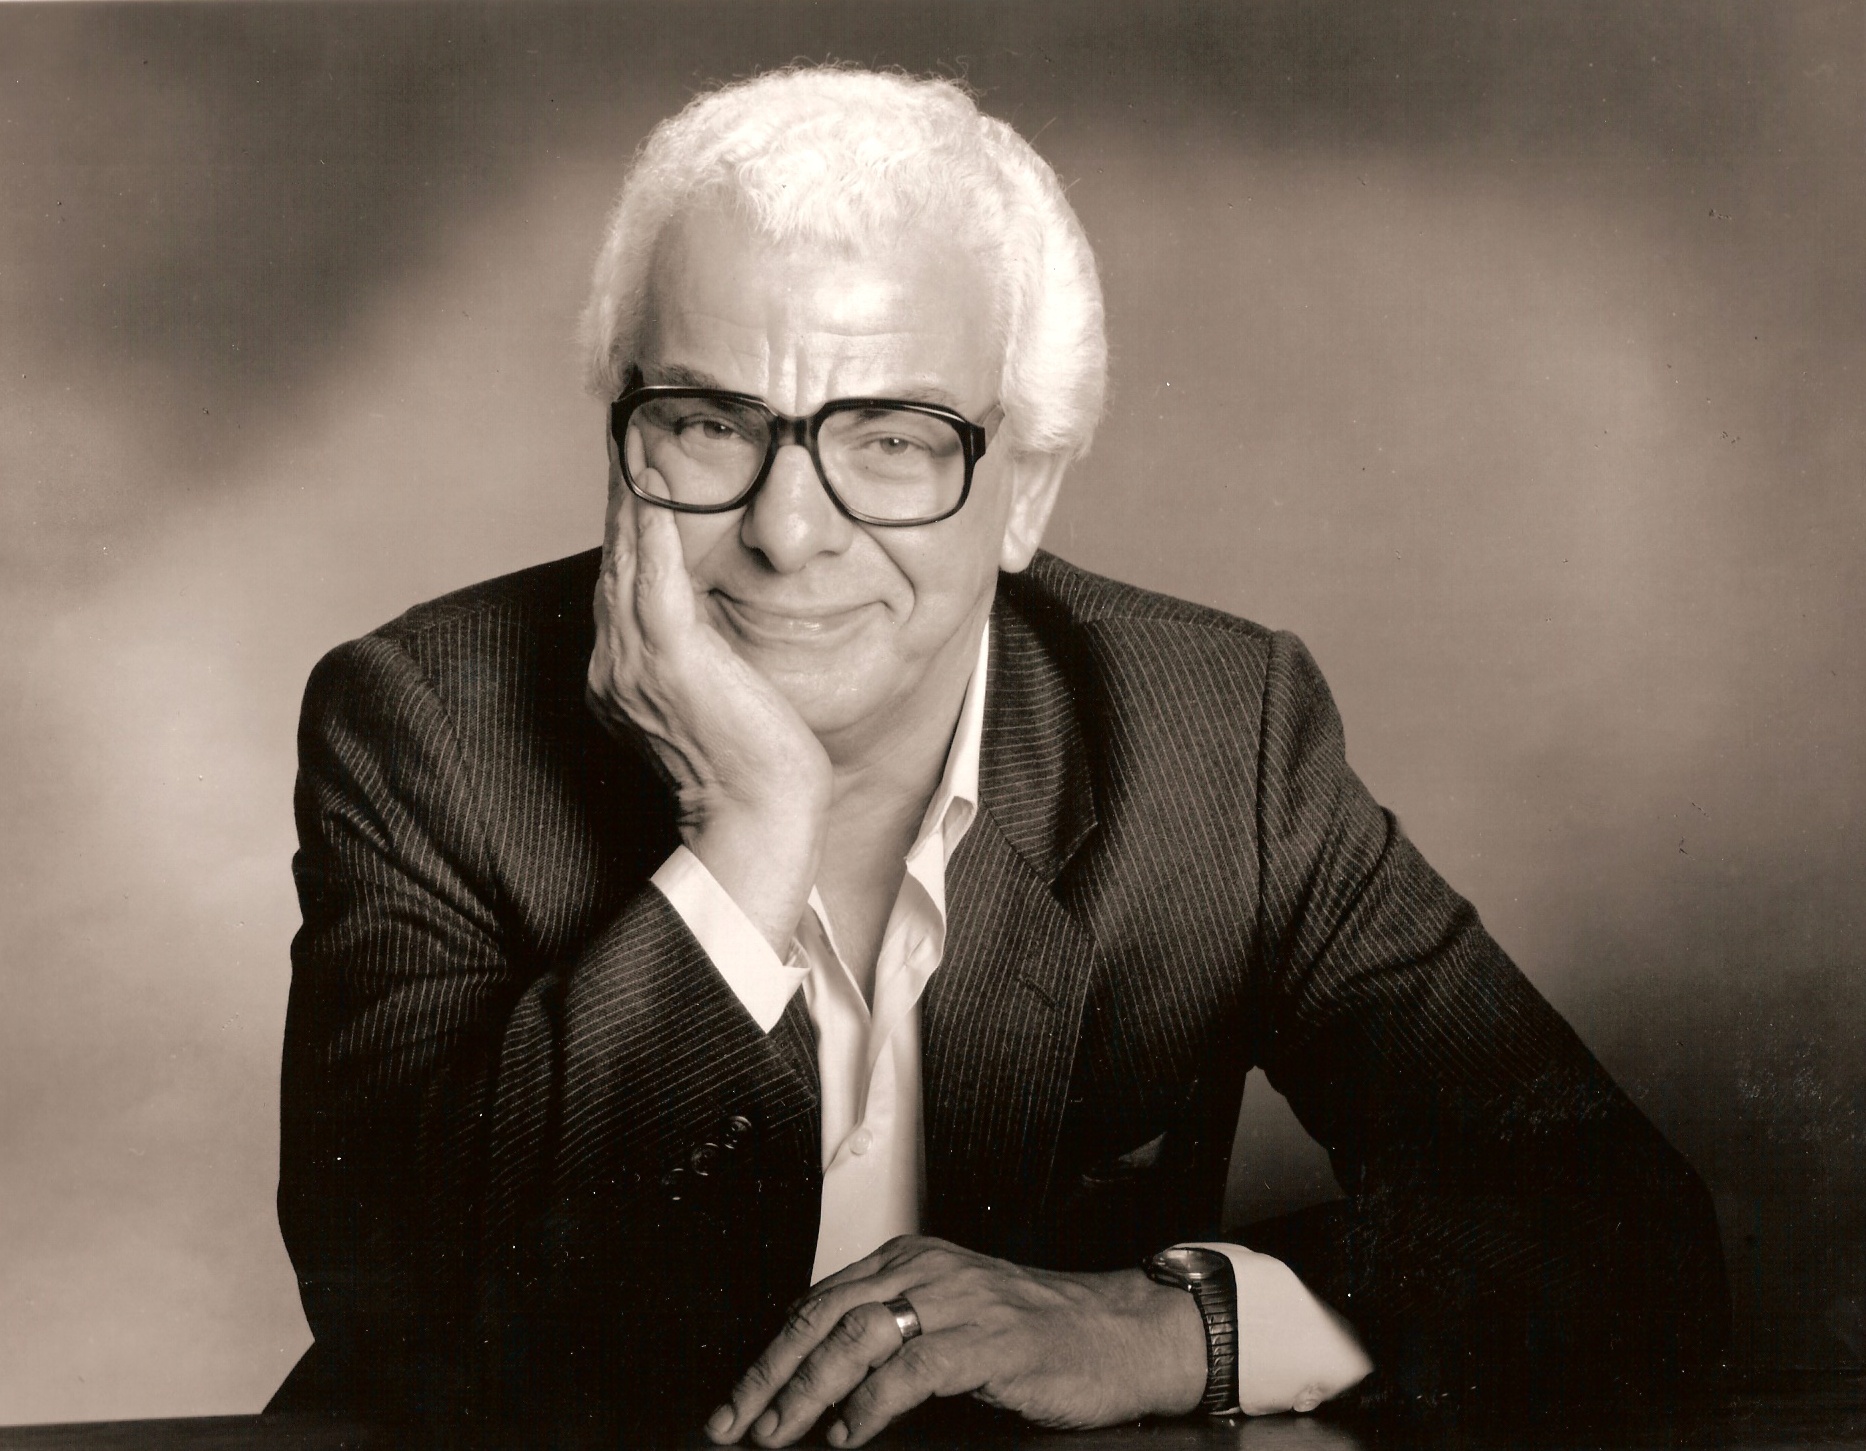 barry cryer - photo #10